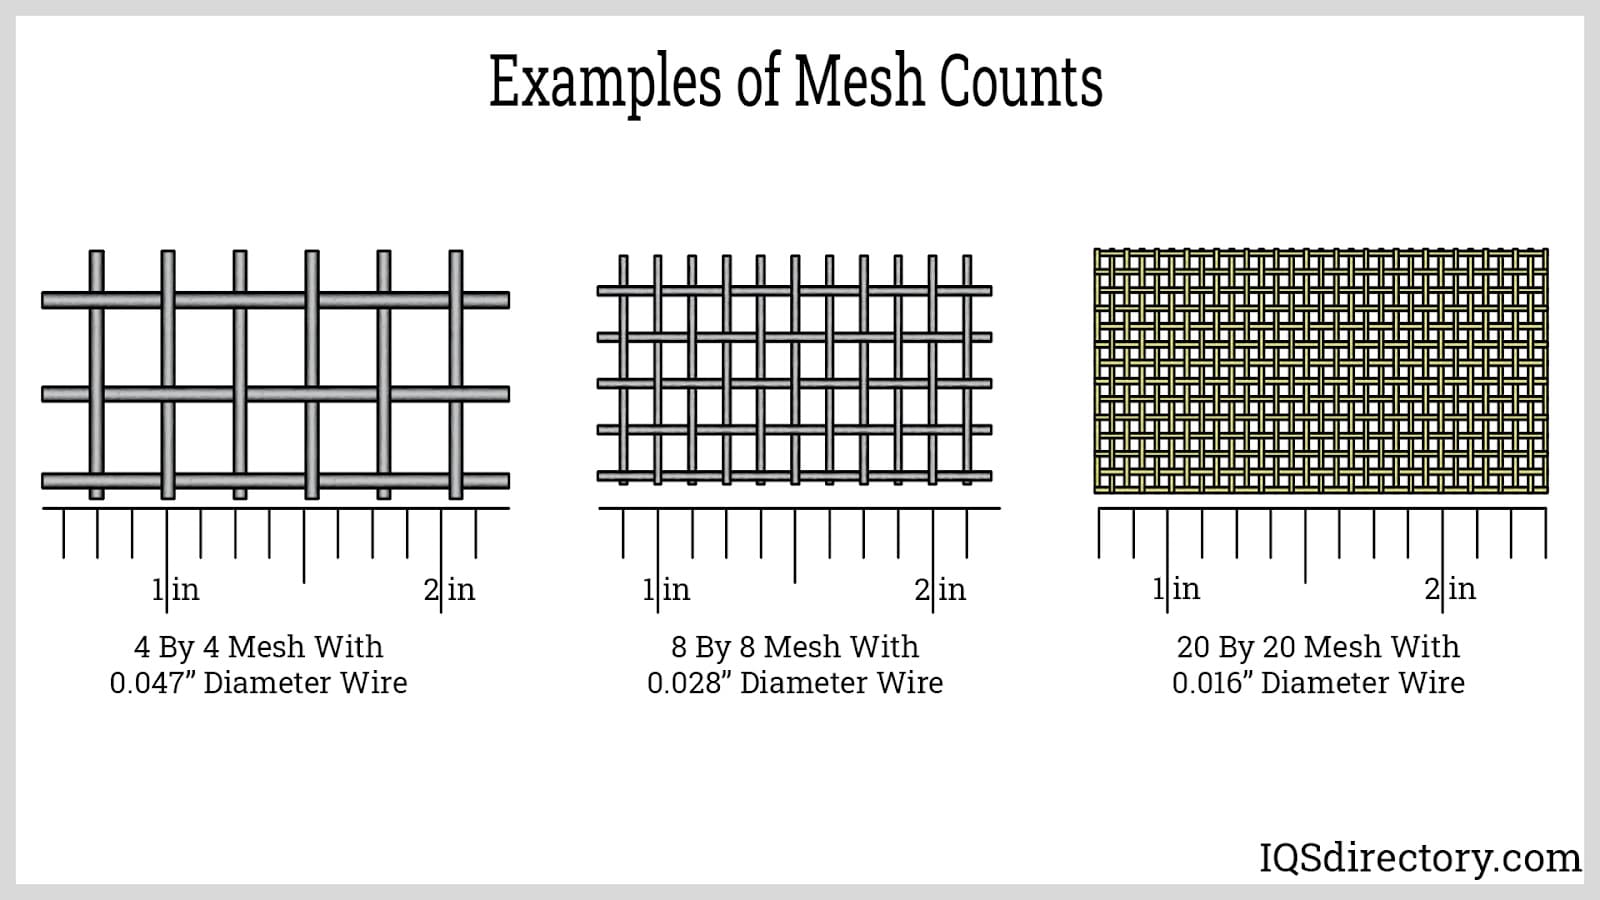 Examples of Mesh Counts